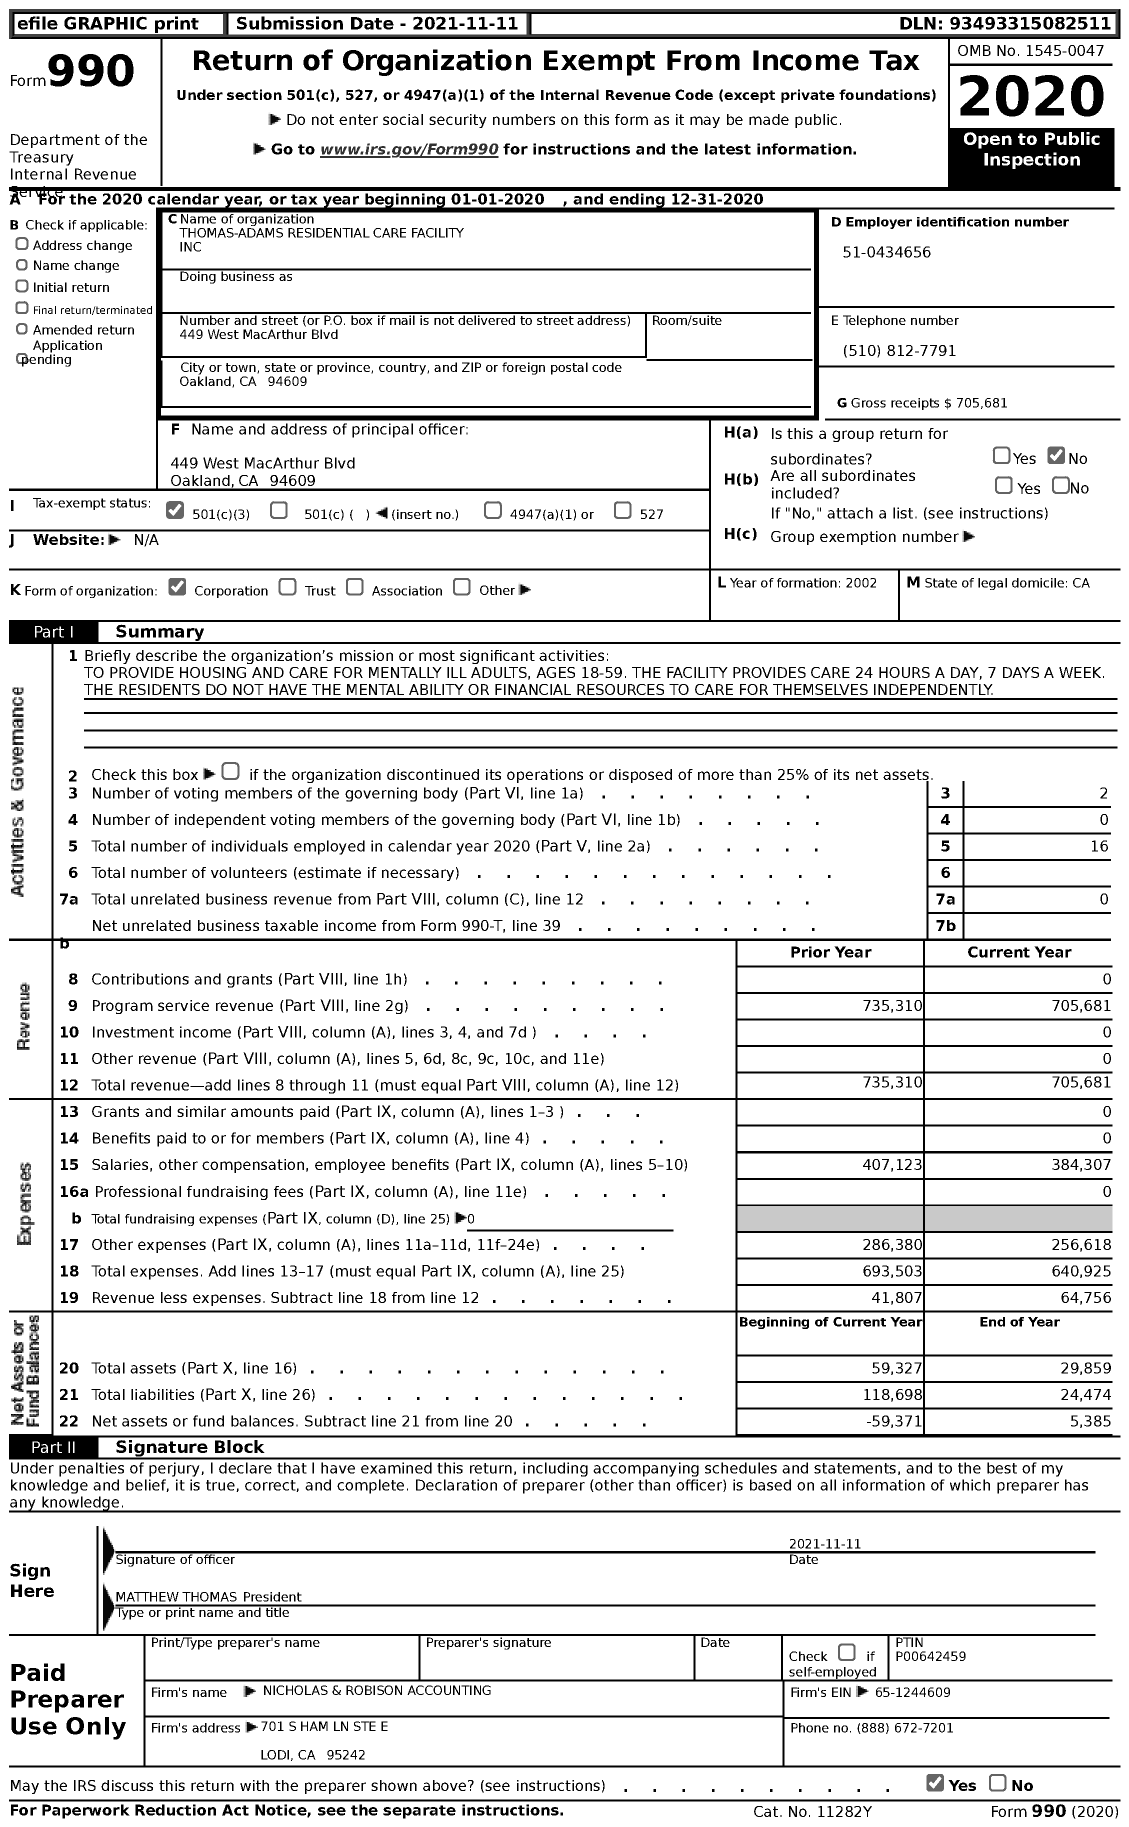 Image of first page of 2020 Form 990 for Thomas-Adams Residential Care Facility